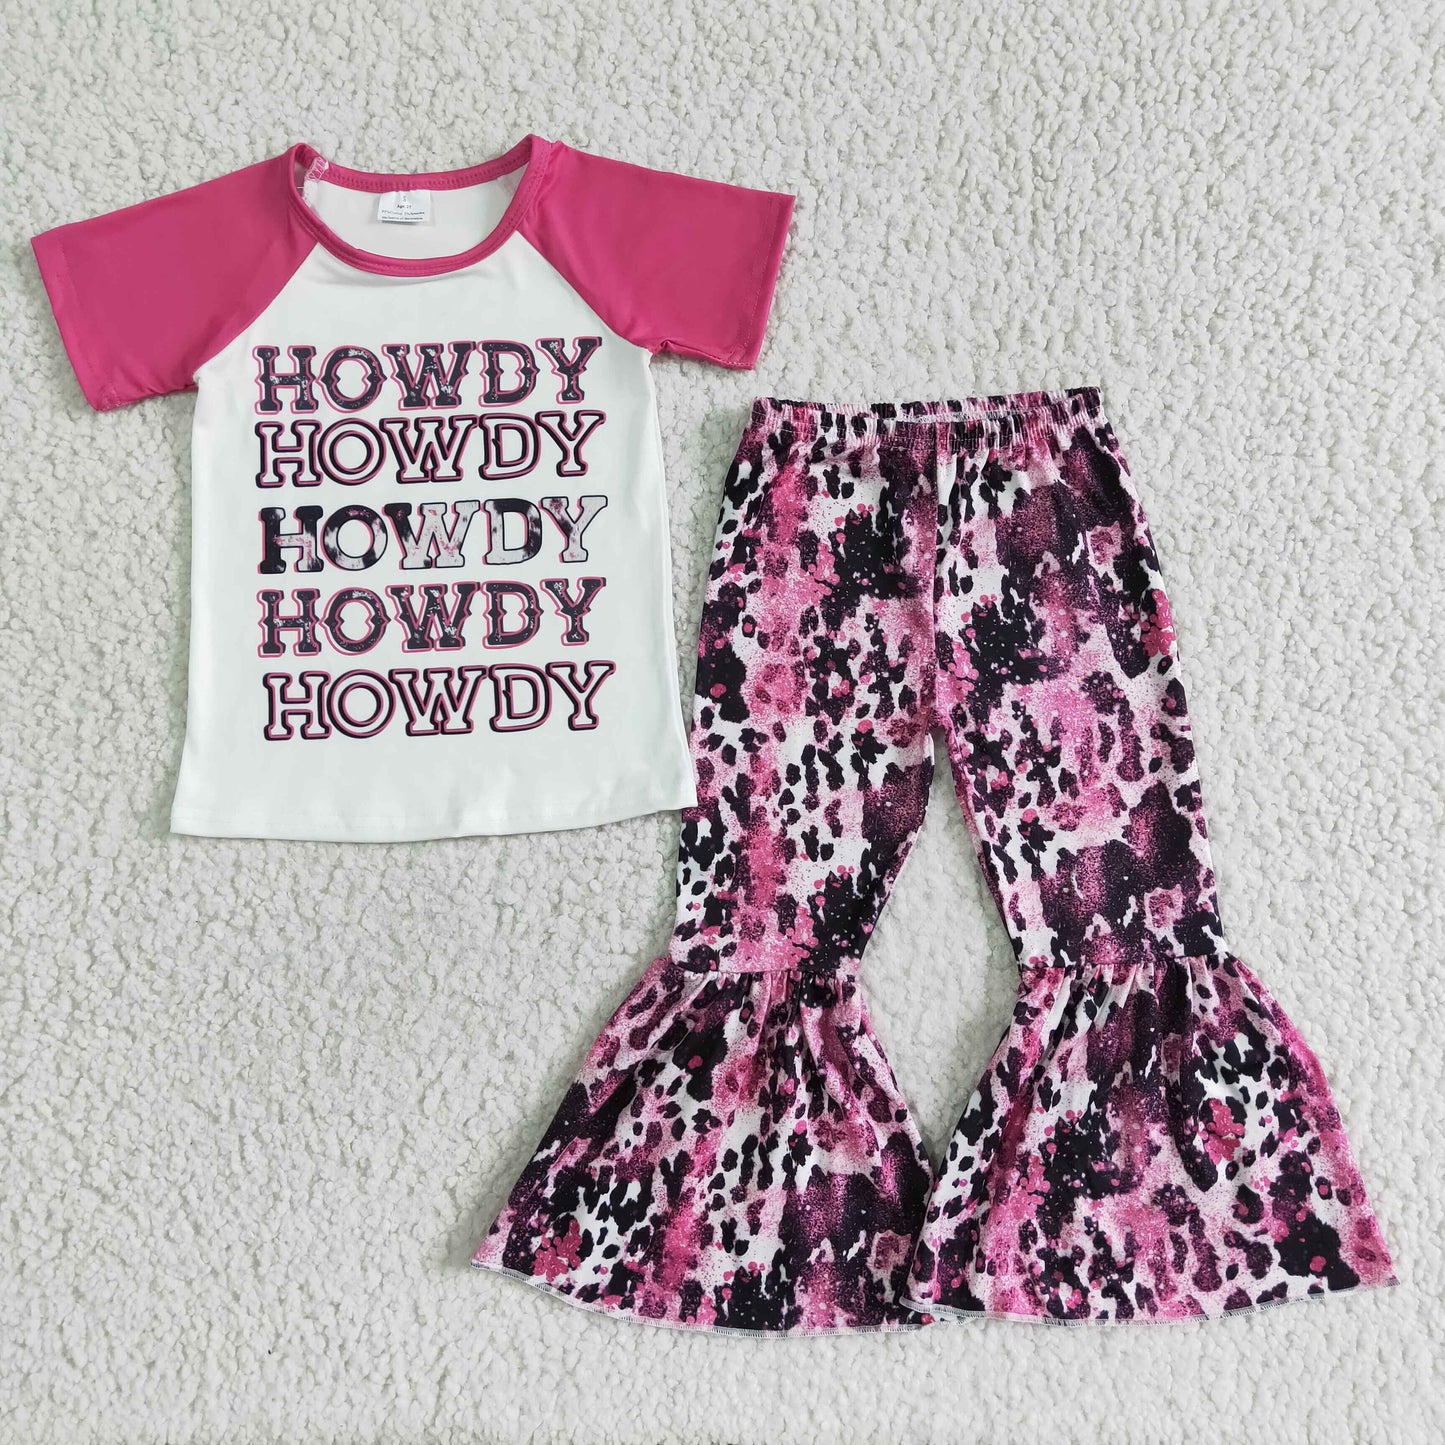 Howdy leopard girls western boutique clothing